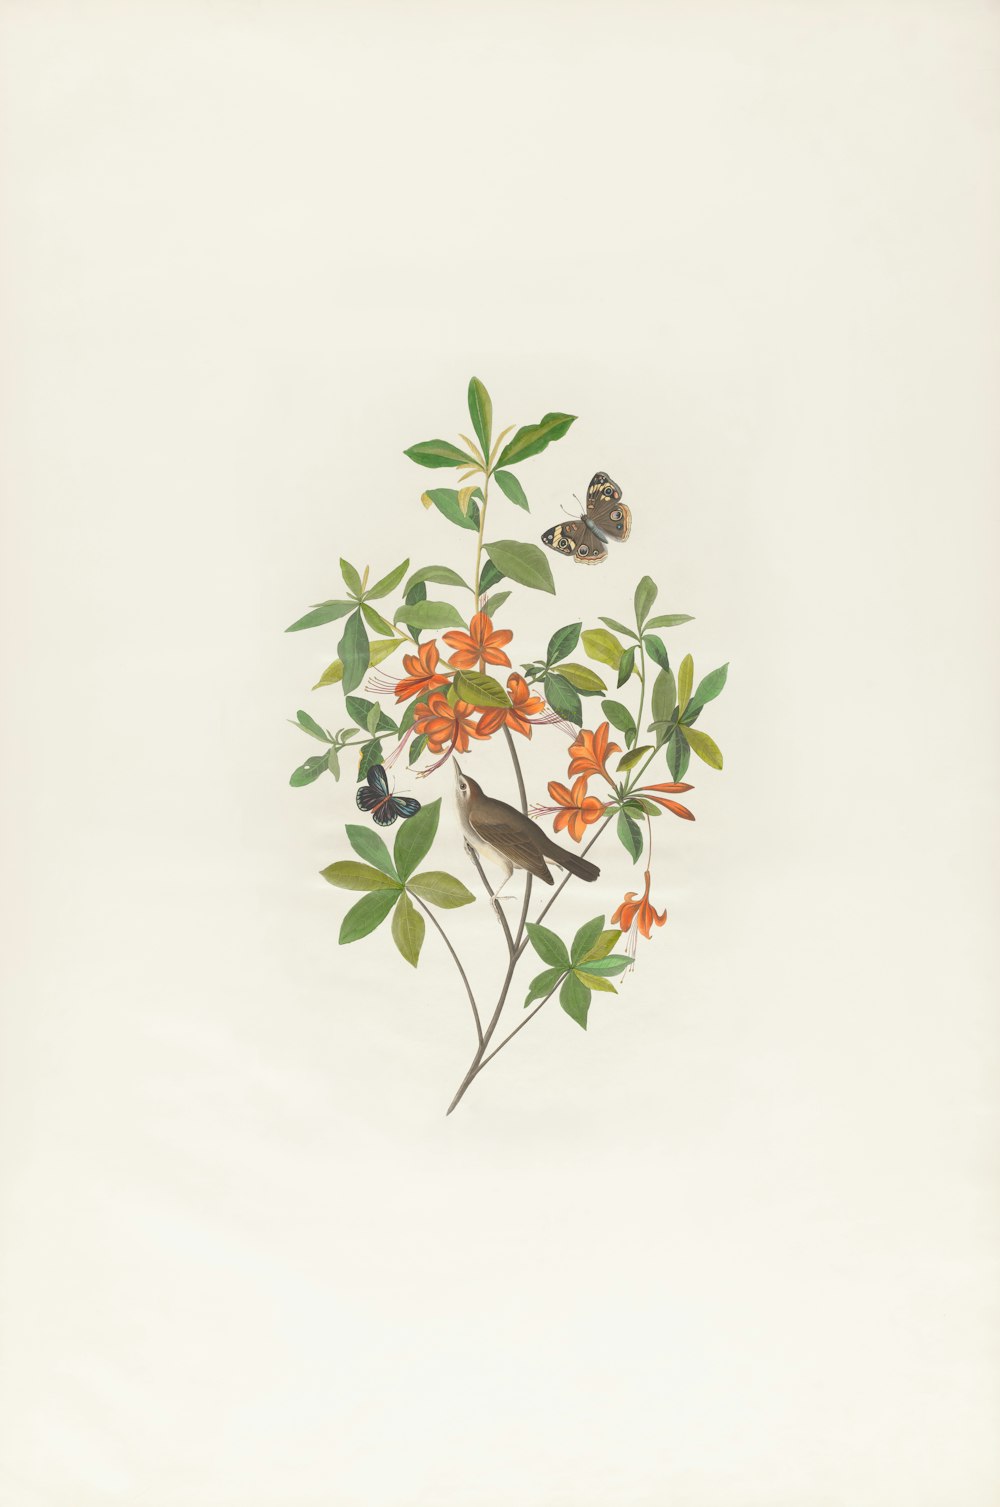 a painting of a bird on a branch with orange flowers